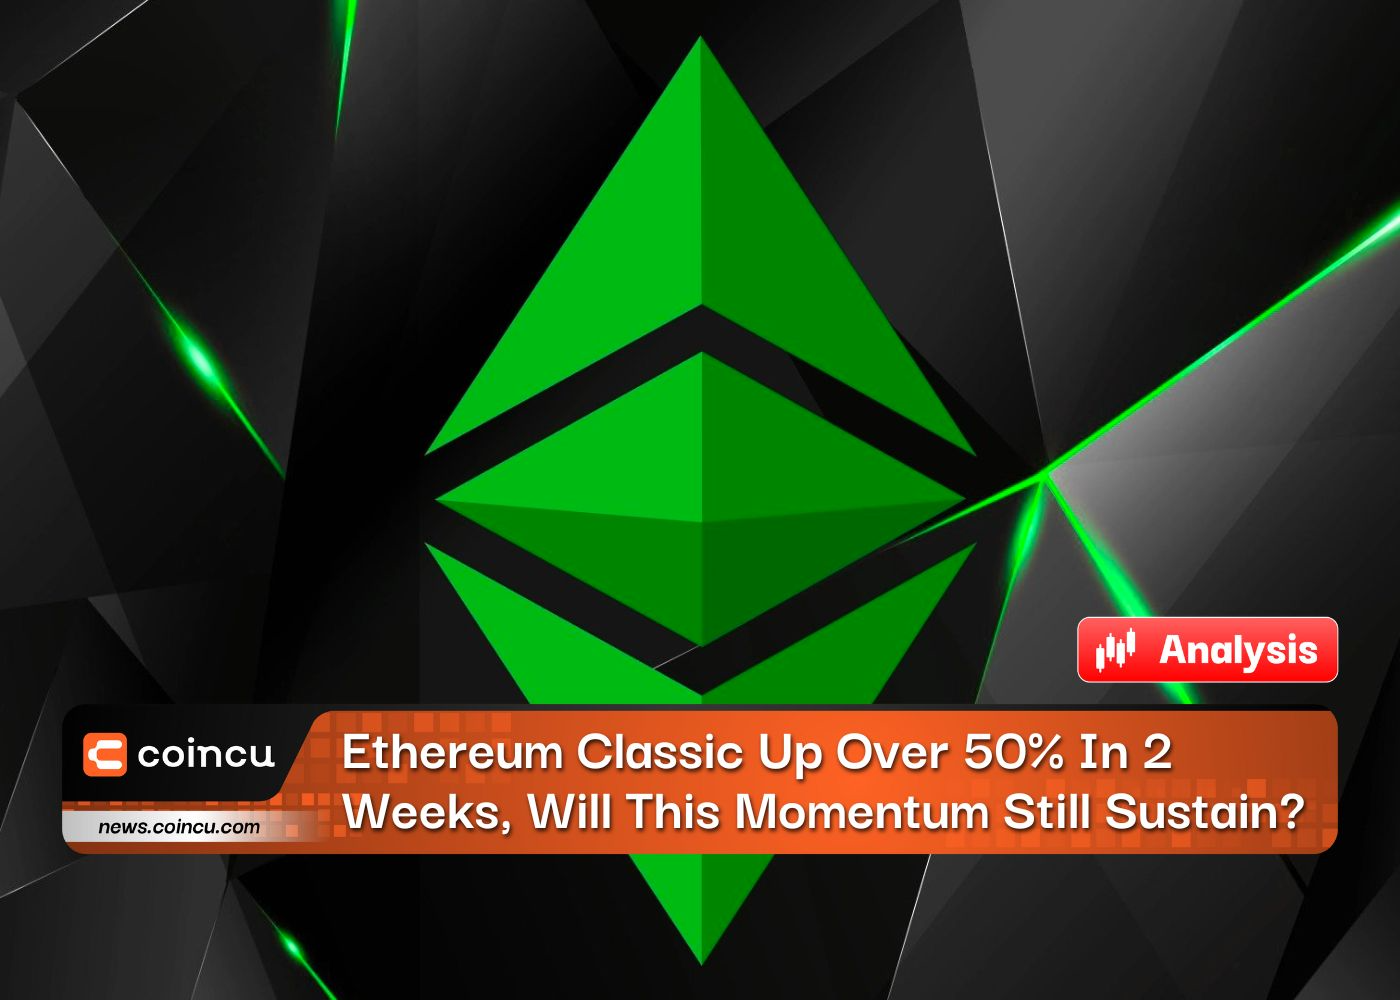 Ethereum Classic Up Over 50% In 2 Weeks, Will This Momentum Still Sustain?